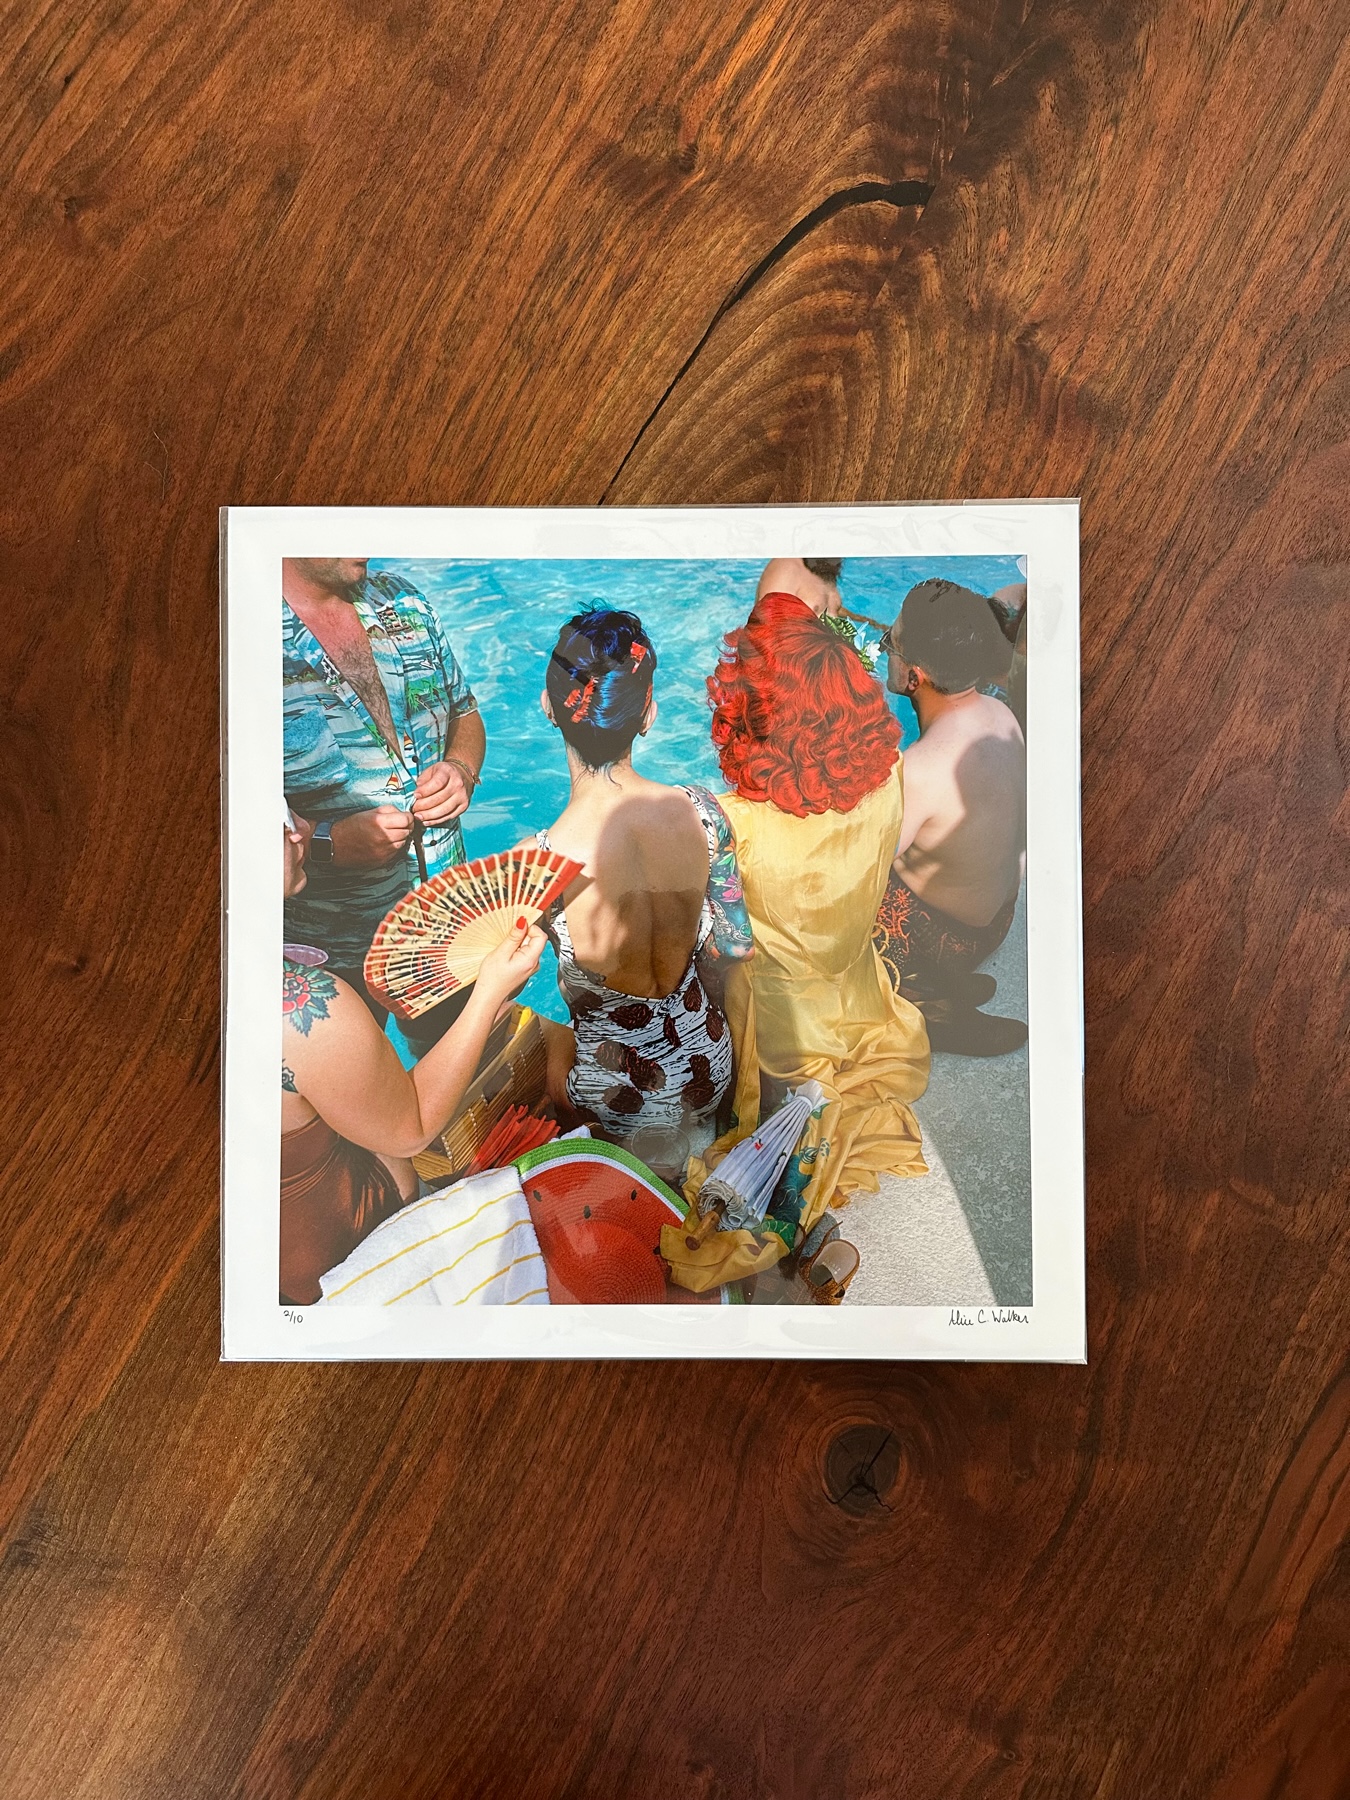 A colorful square photographic print enclosed in a clear plastic envelope.